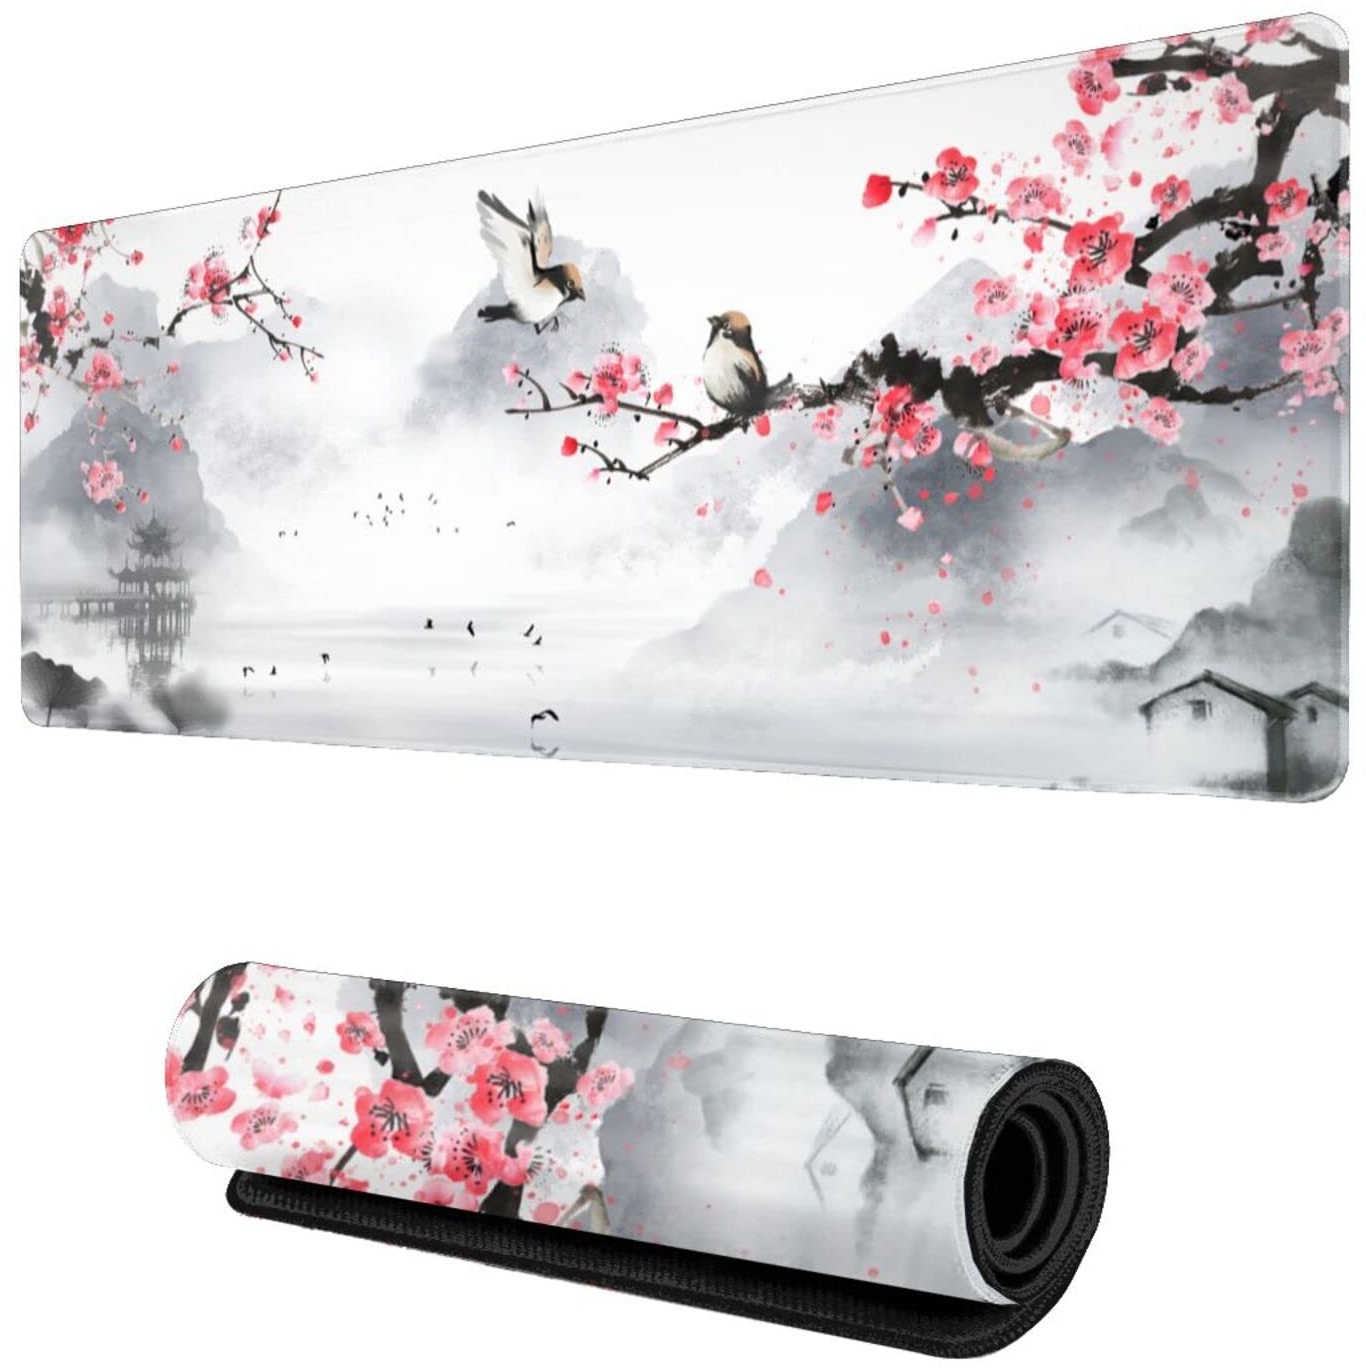 Cherry Blossom Mauspad Gaming Mauspad 31.5 X 11.8 Inch Japanese Pink Sakura Mouse Pad Stitched Edges Rubber Base Non-Slip Waterproof Large Mouse Pad Suitable Desk / Office / Game